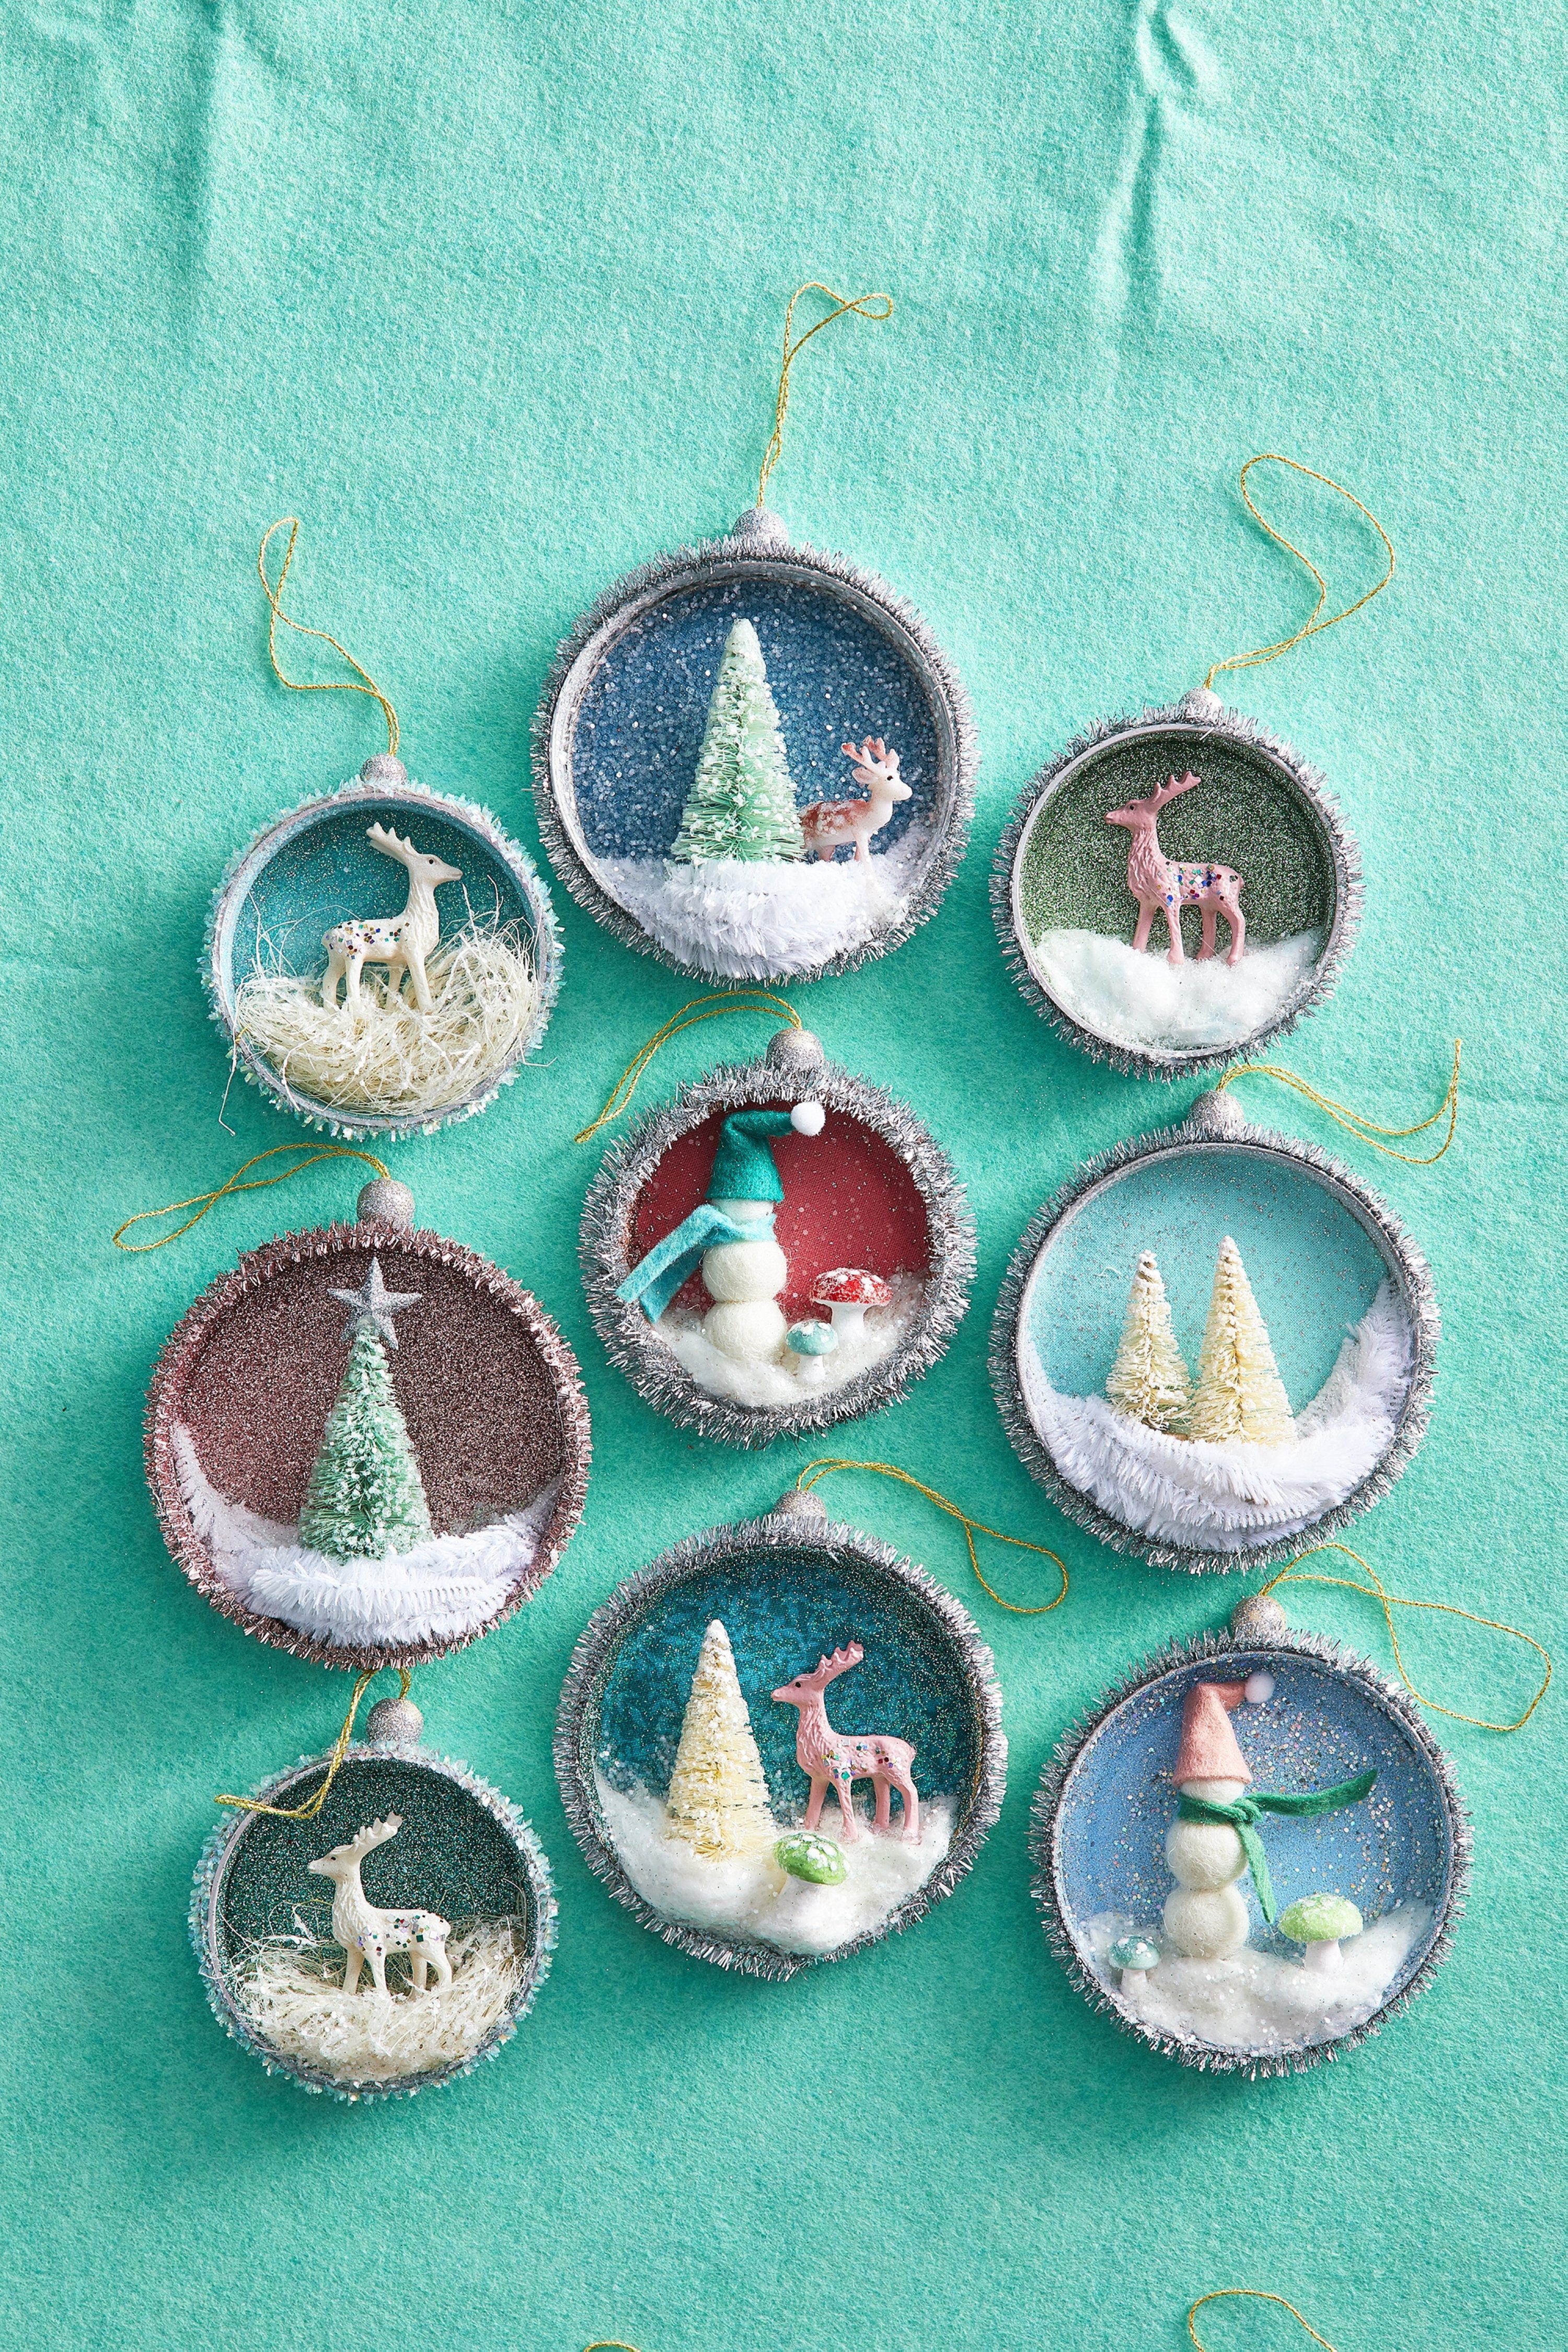 This image provided by Better Homes & Gardens shows diorama ornaments made out of upcycled Mason jar lids. (Carson Downing/Better Homes & Gardens via AP)